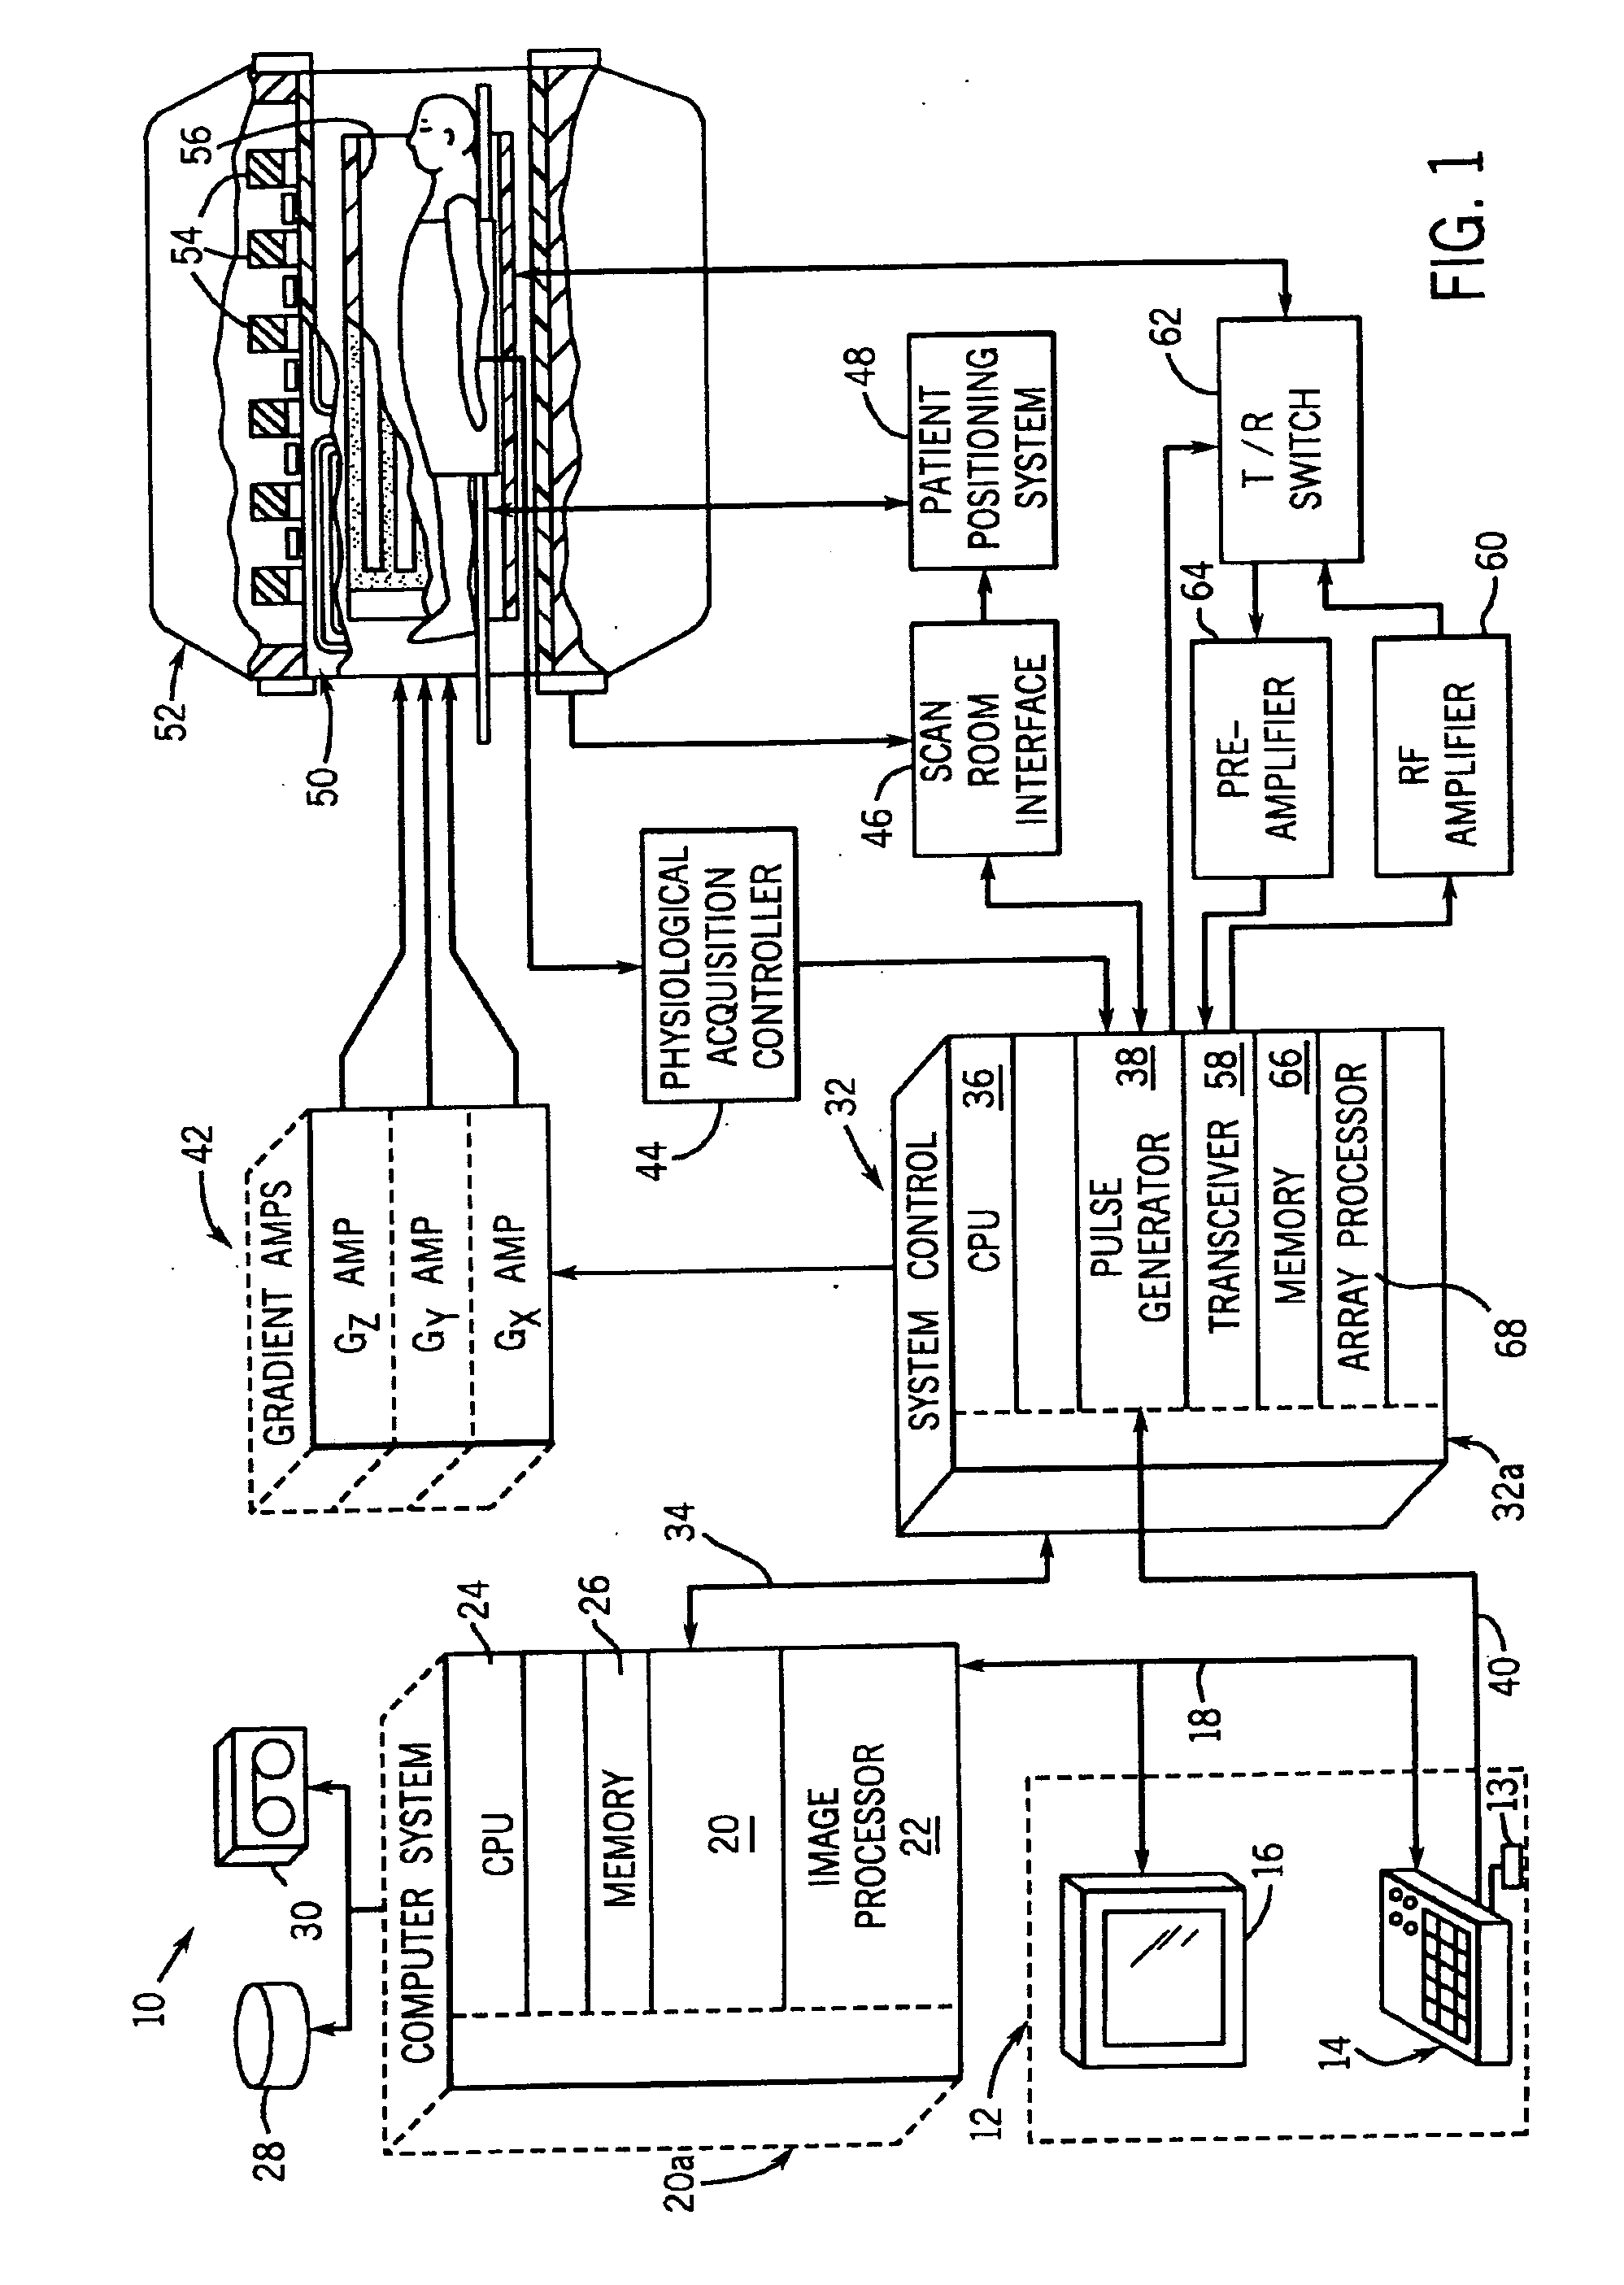 Method and apparatus of echo planar imaging with real-time determination of phase correction coefficients